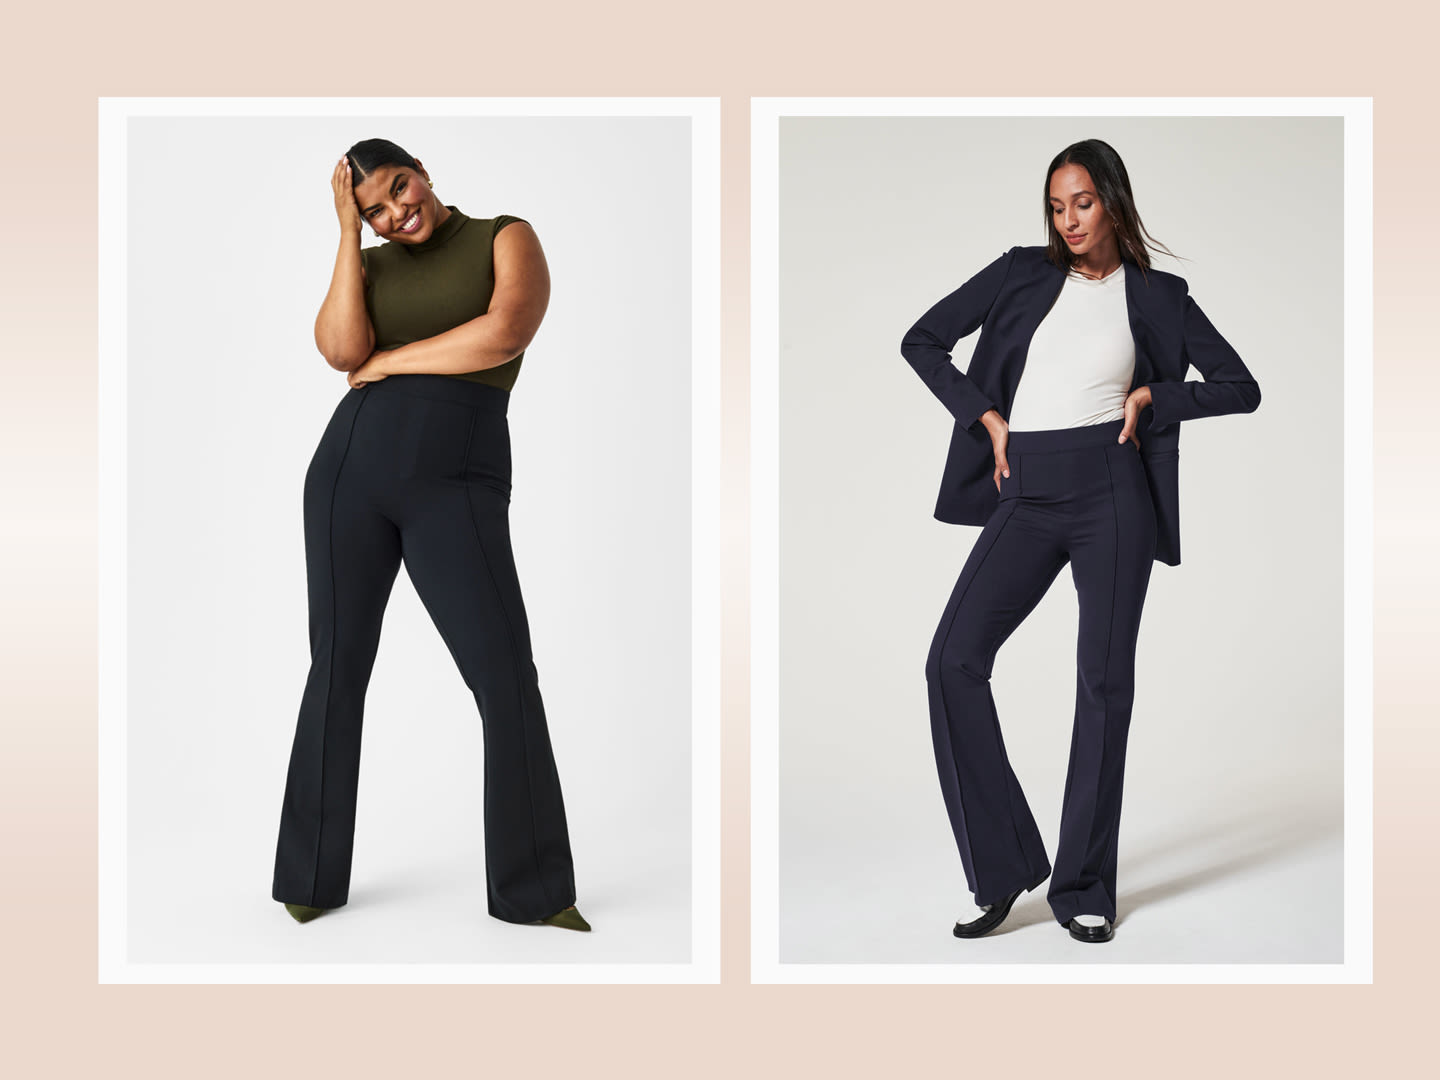 I Tried Oprah’s ‘Favorite’ Spanx Pants & They’re as ‘Ultra-Flattering’ as She Says — My Bum Has Never Looked Better